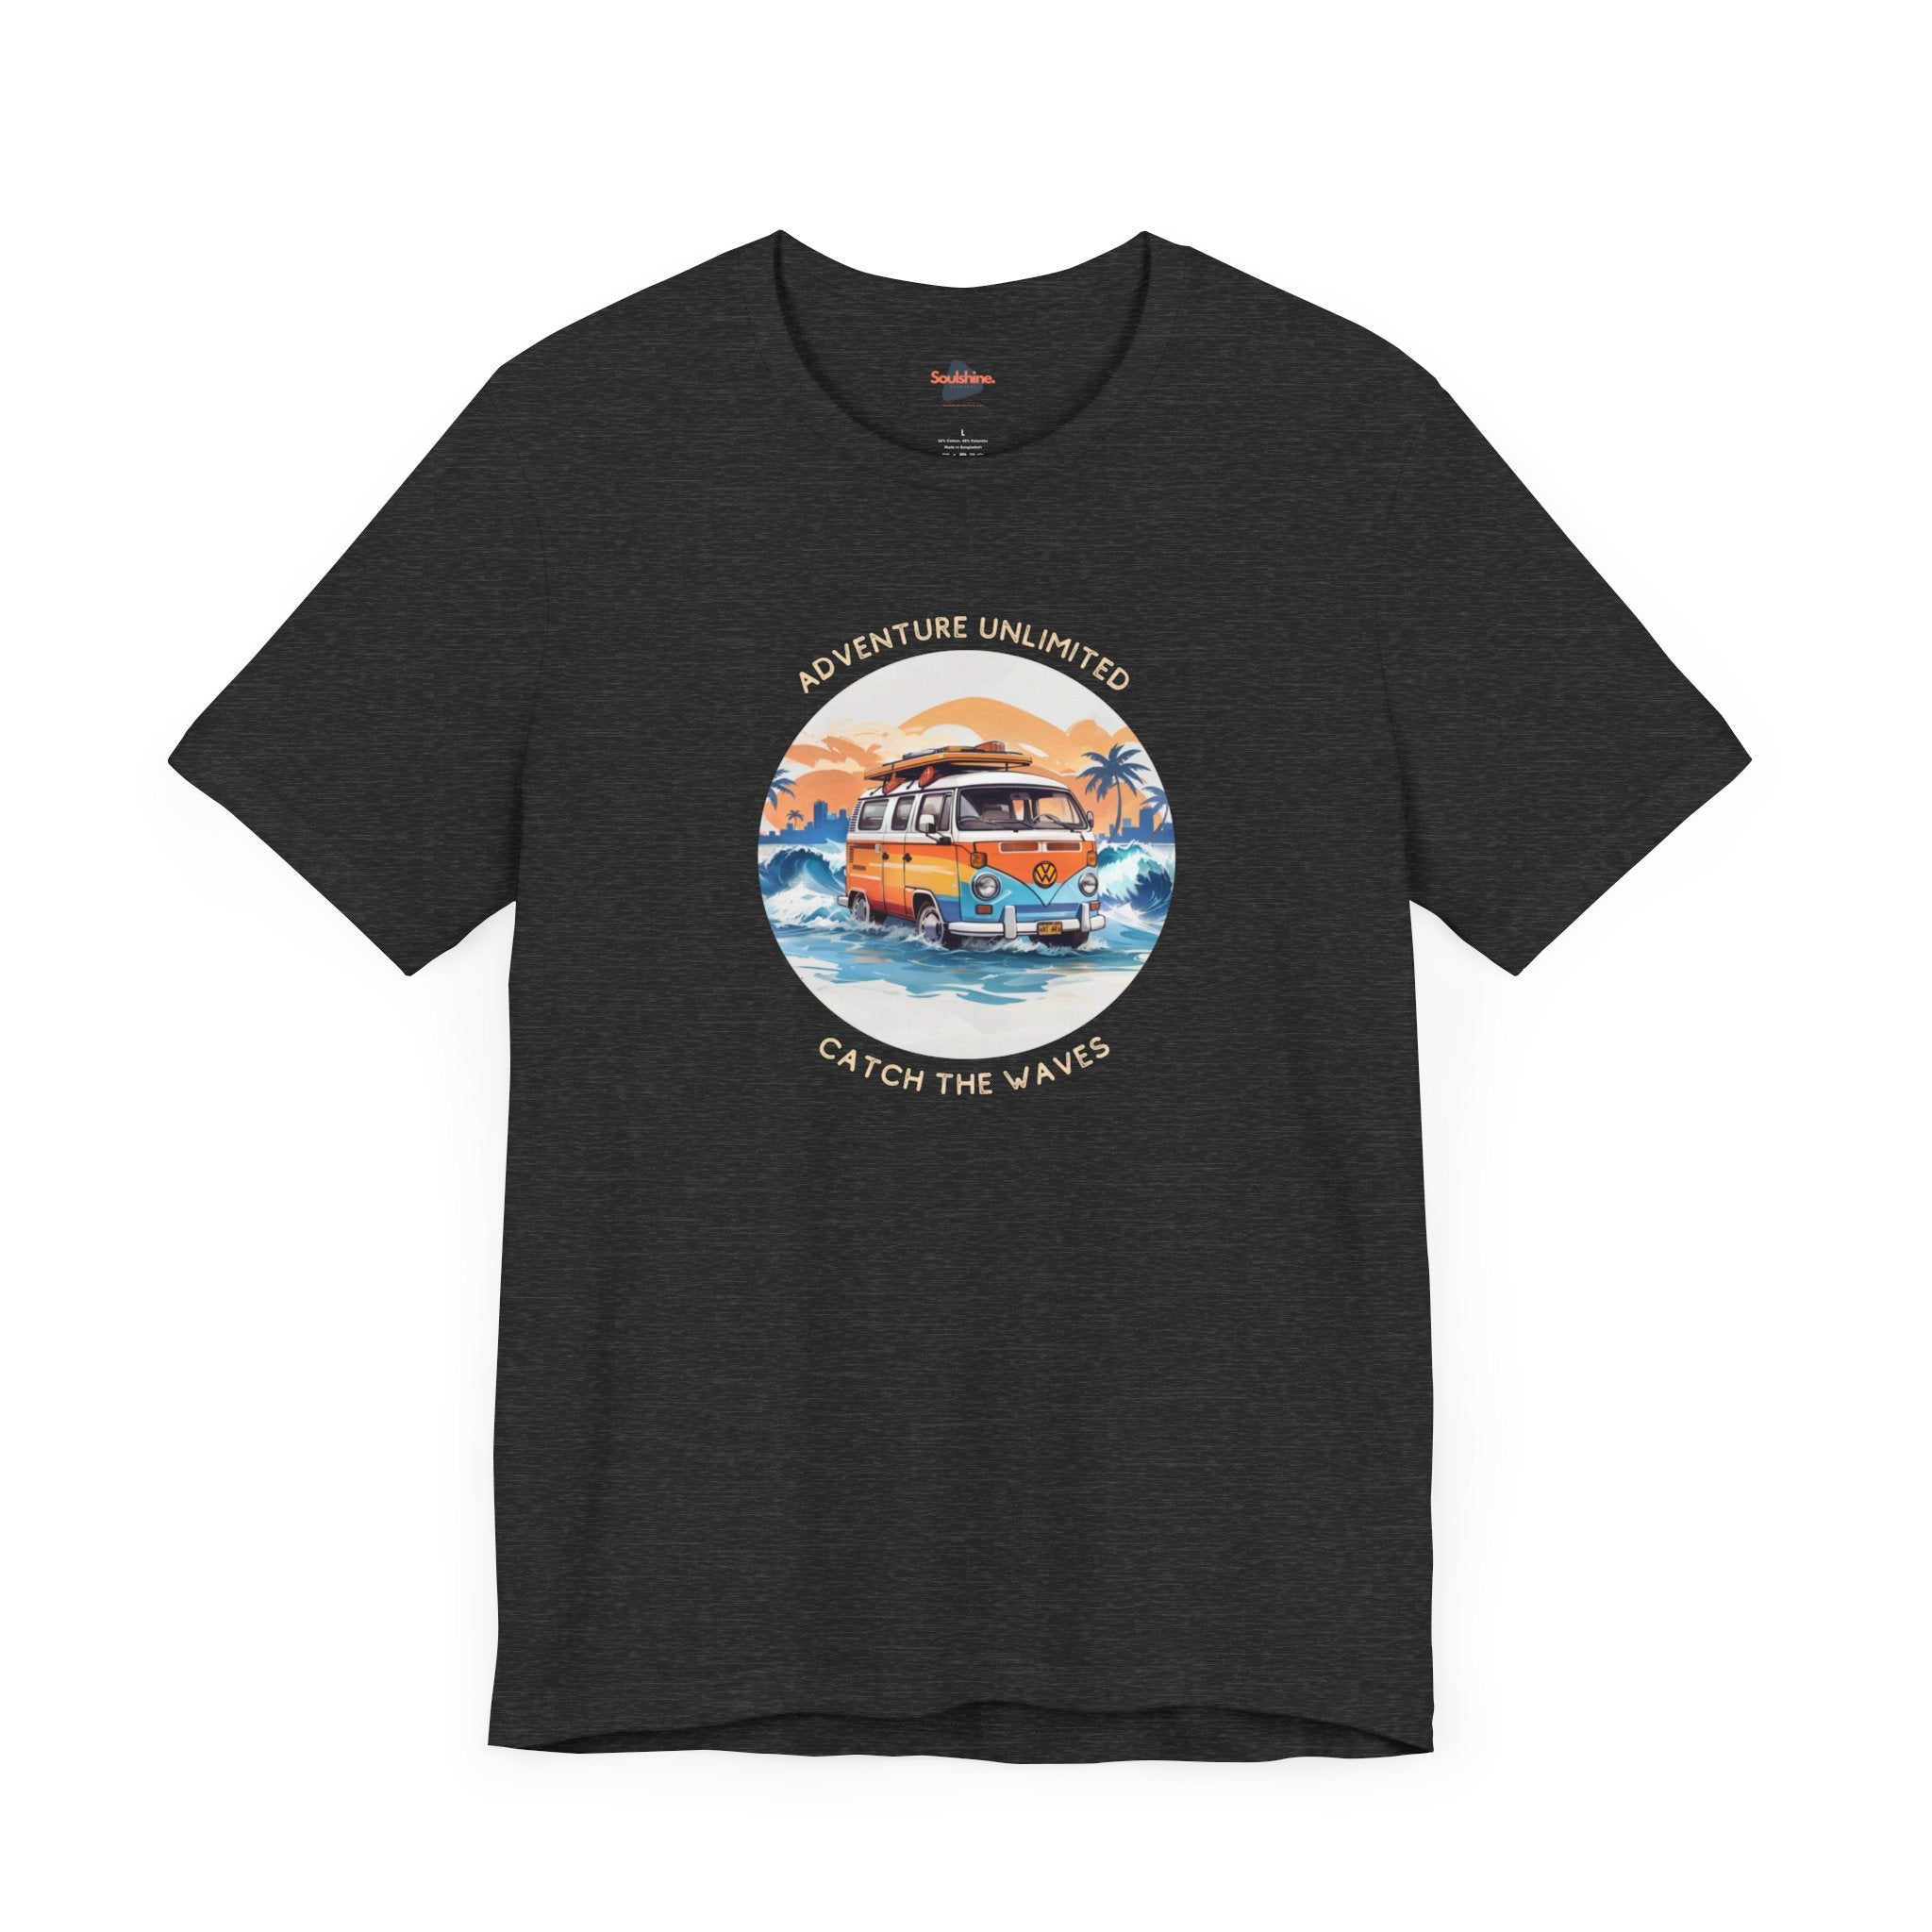 Adventure Unlimited black t-shirt with beach van design - direct-to-garment printed item